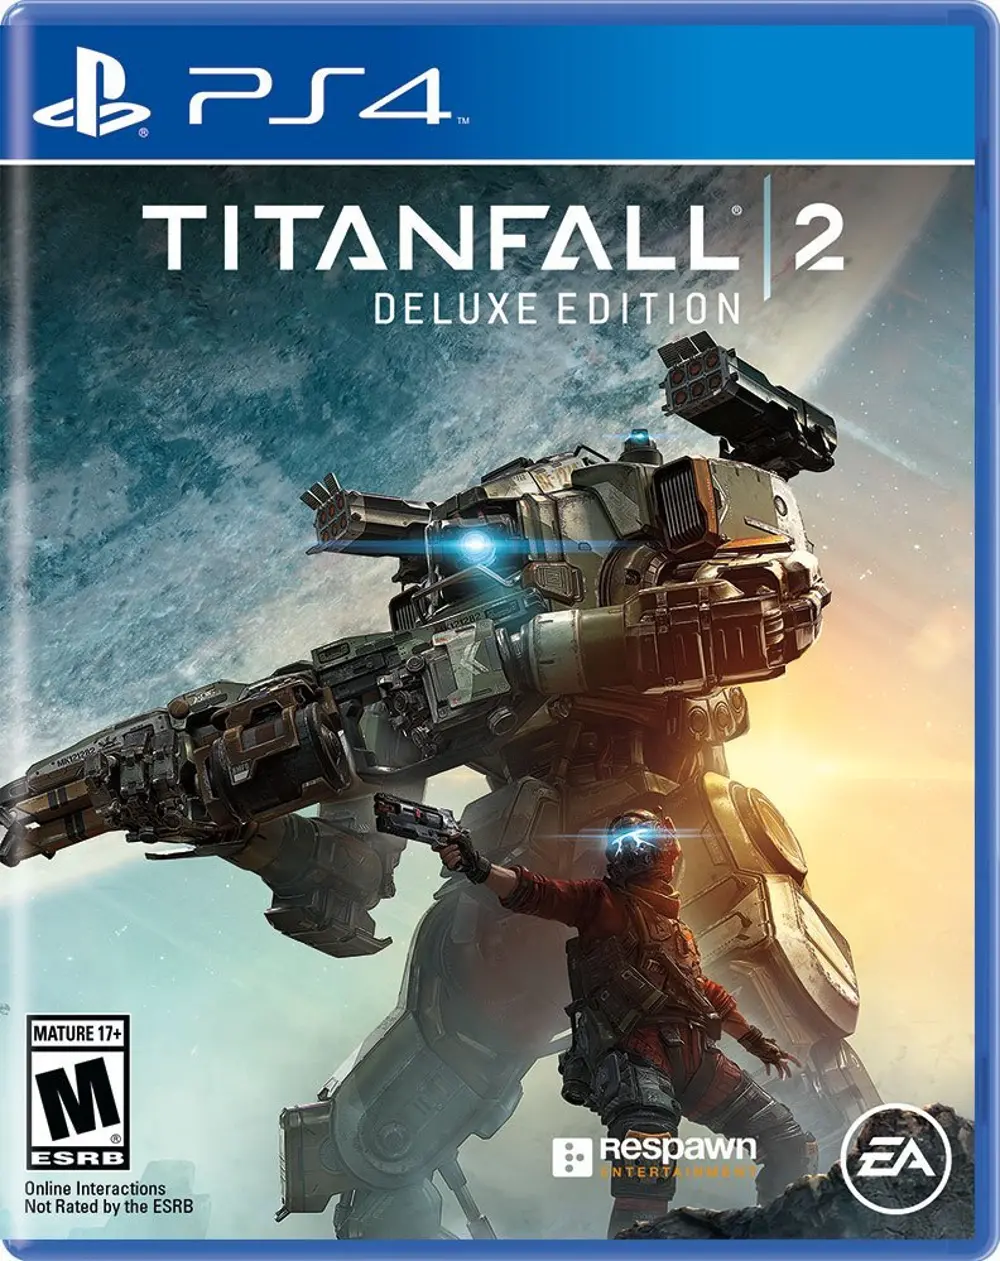 PS4 ELA 37125 Titanfall 2 Deluxe Edition - PS4-1